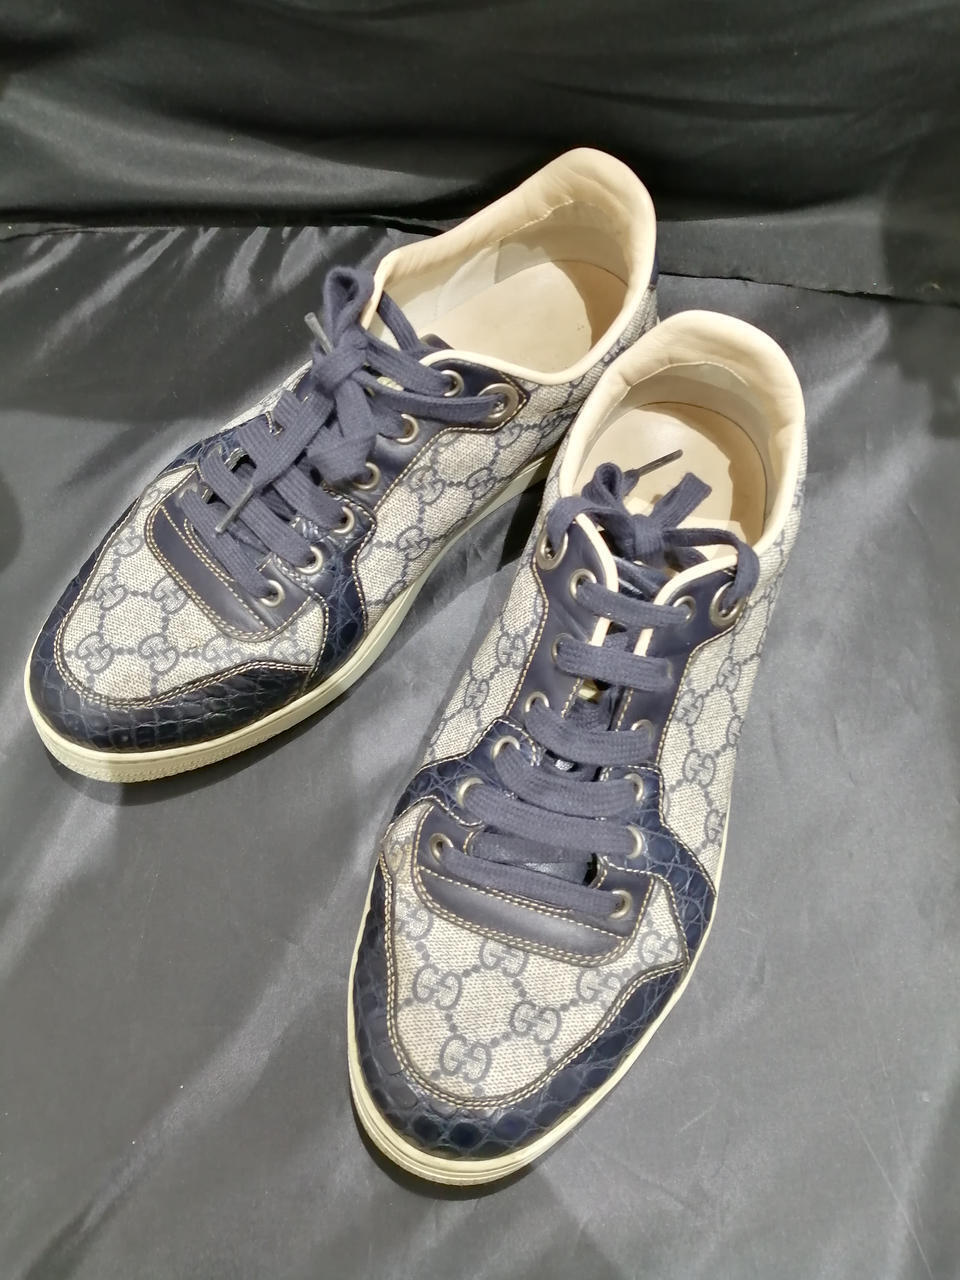 BEST OFFER GUCCI sneakers 283117 71/2 US:71/2 from Japan 